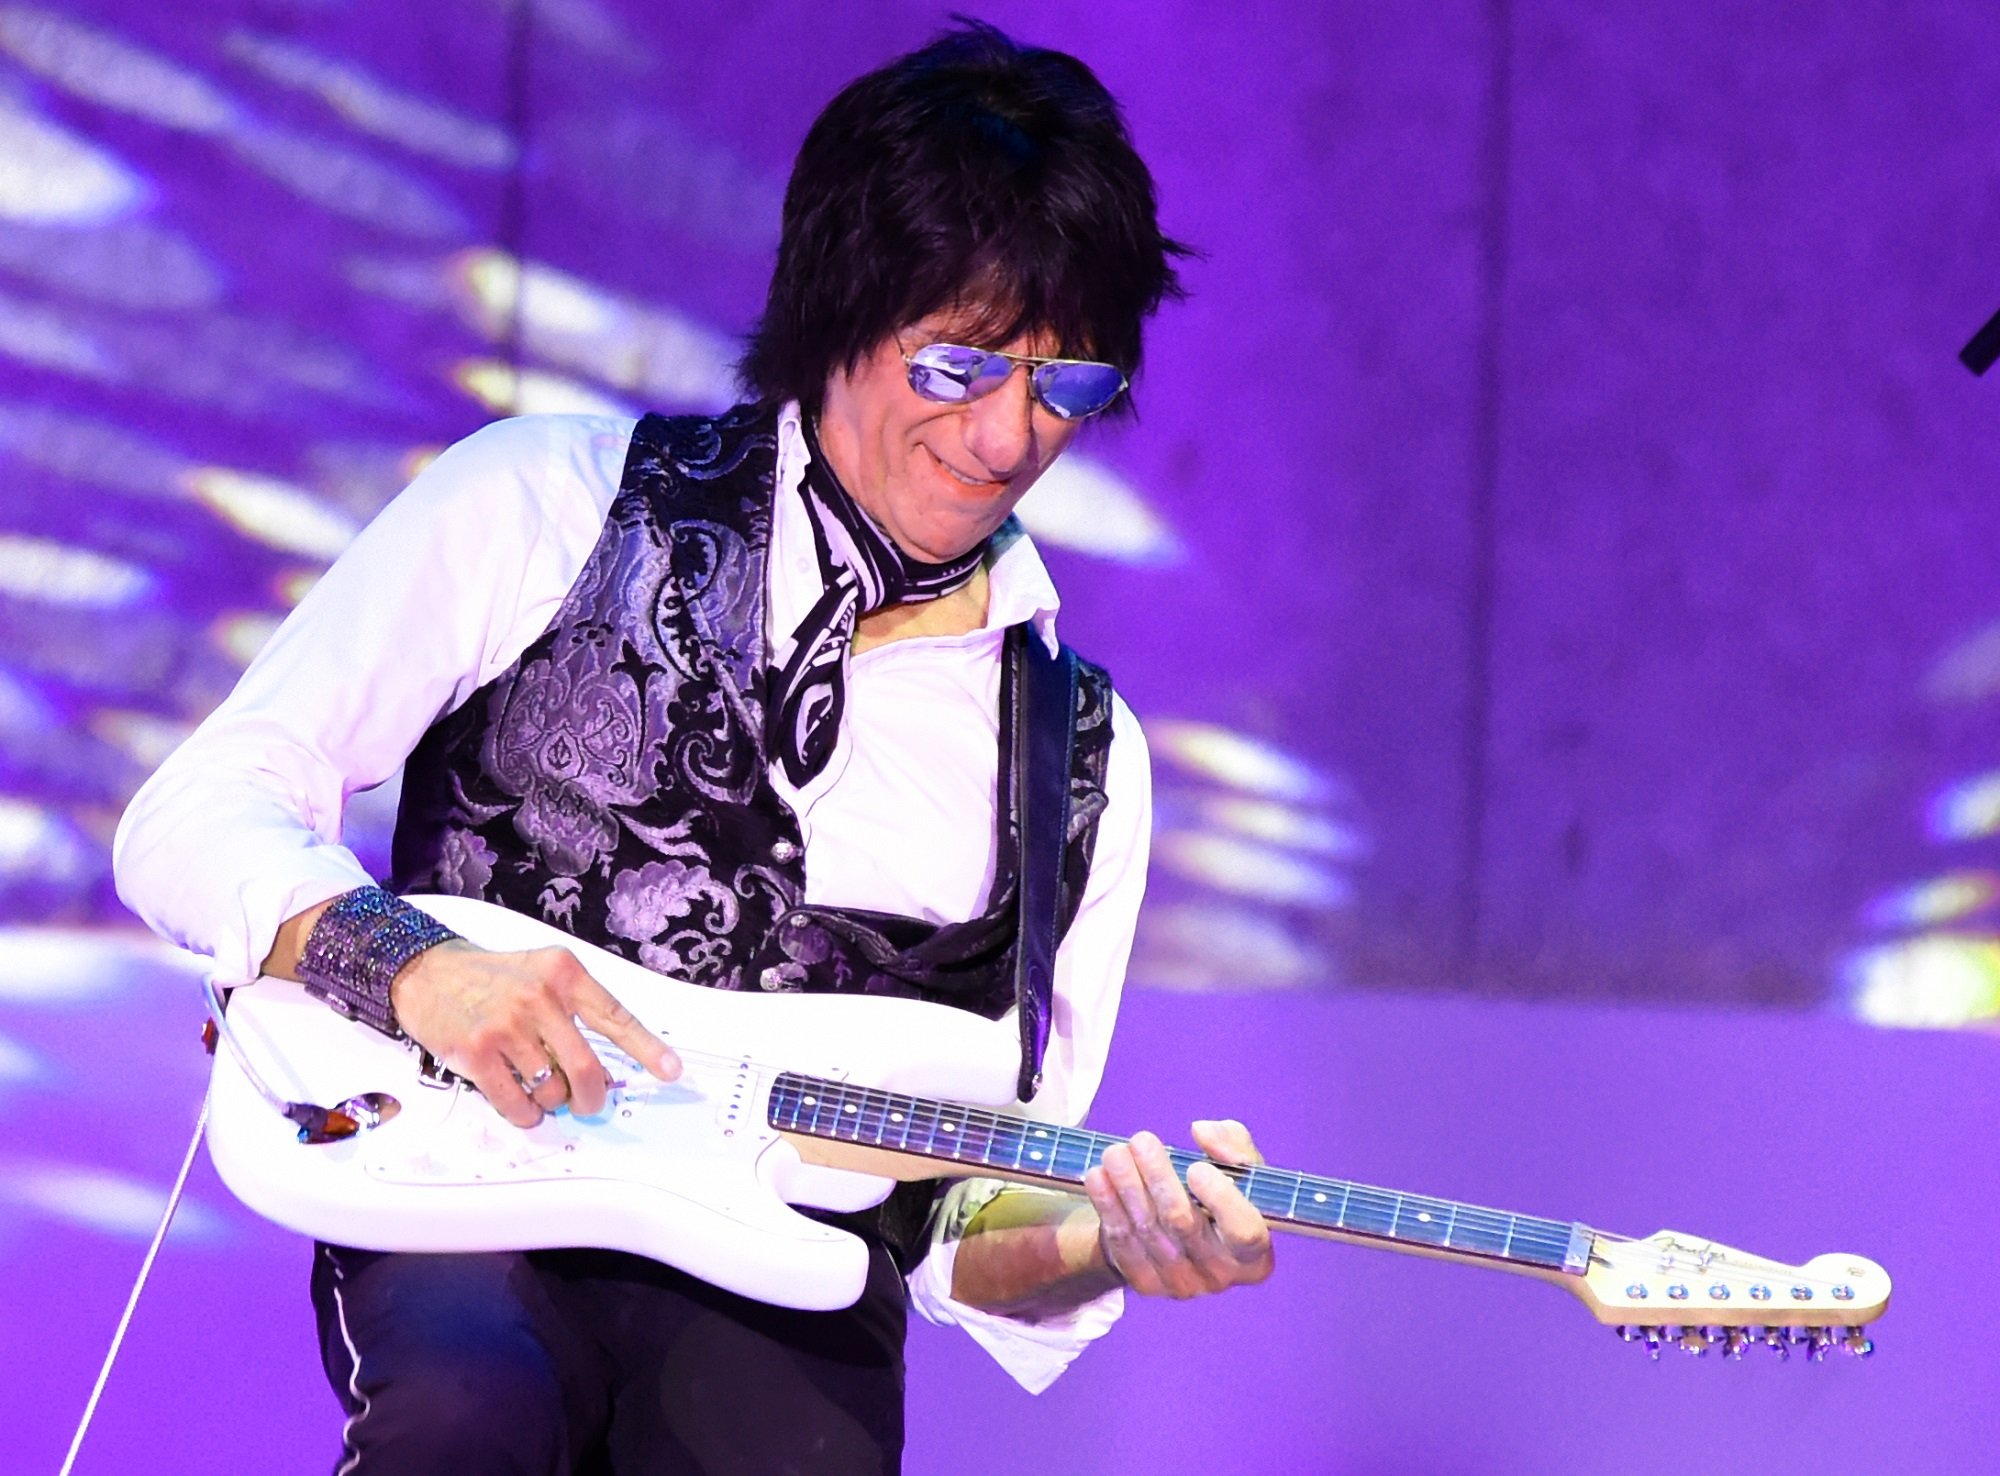 Jeff Beck plays a white electric guitar on stage